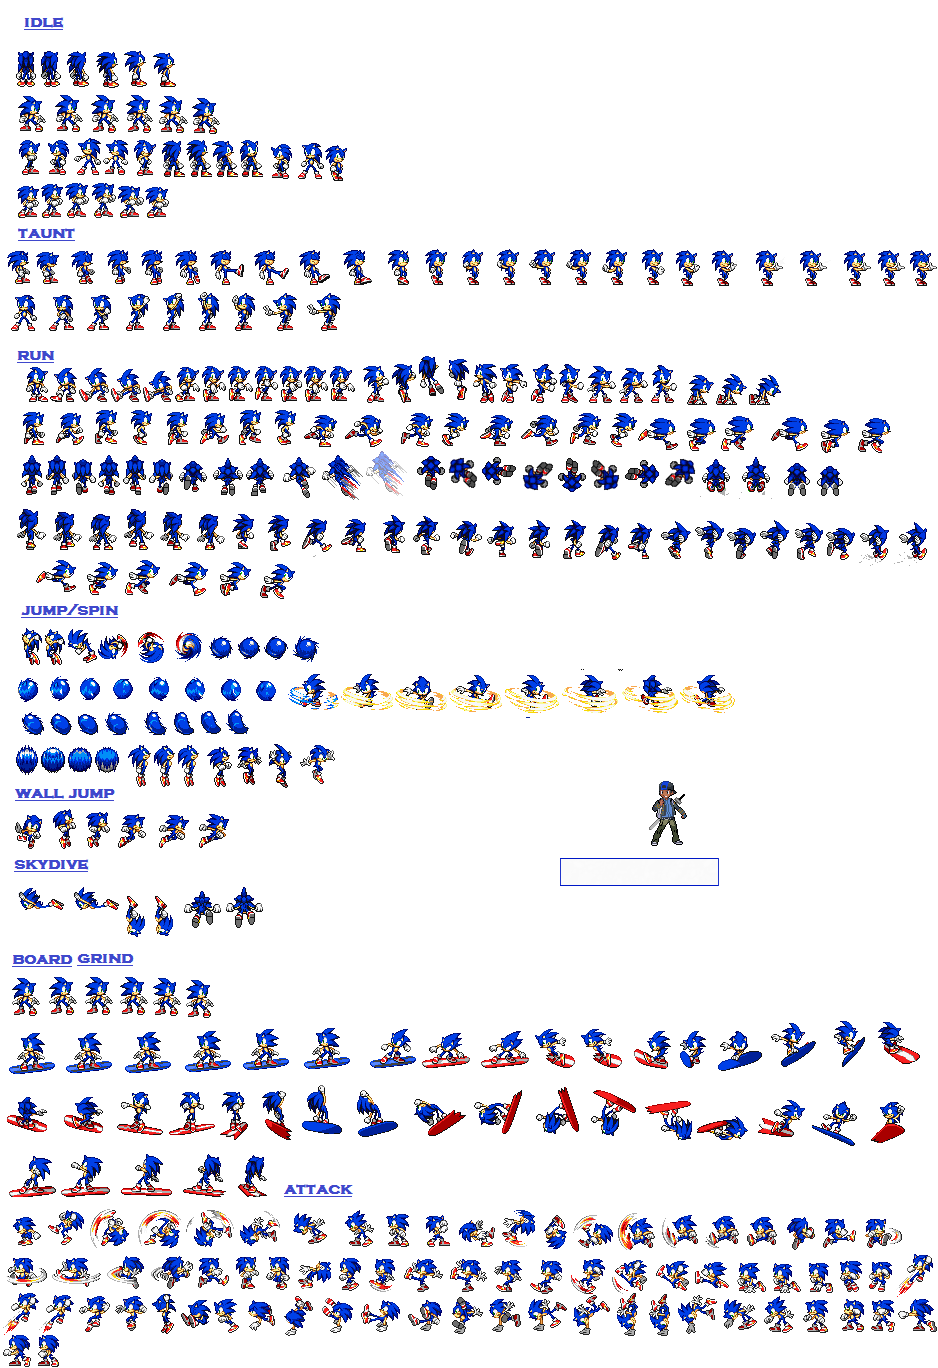 A modern sonic based sheet unfinished by Laijee227 on DeviantArt